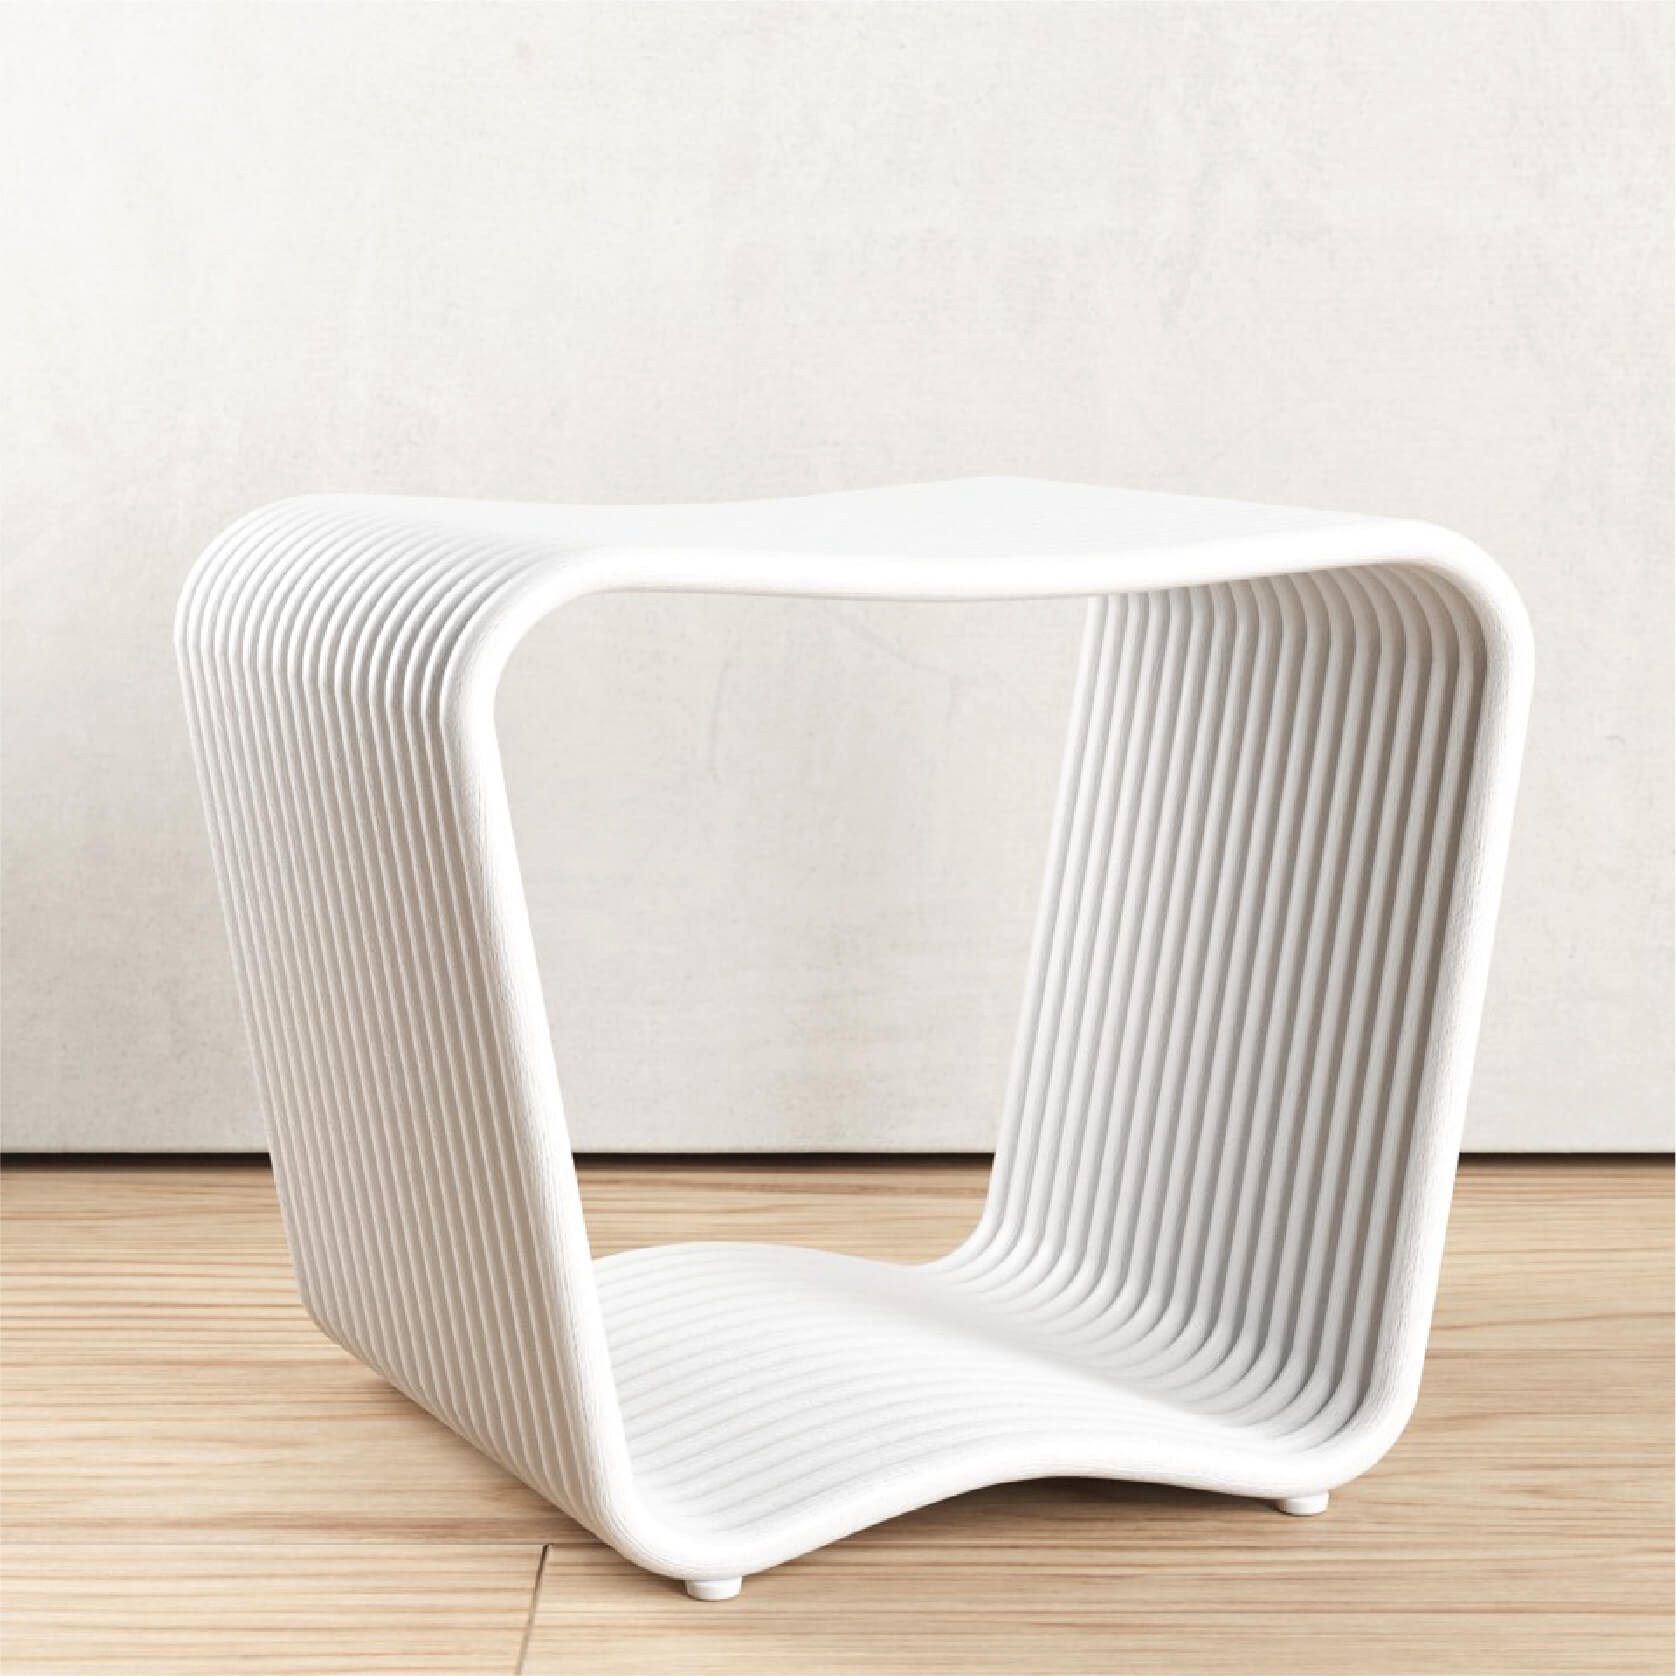 Rattan Stool by Murillo - Design Commune Feature